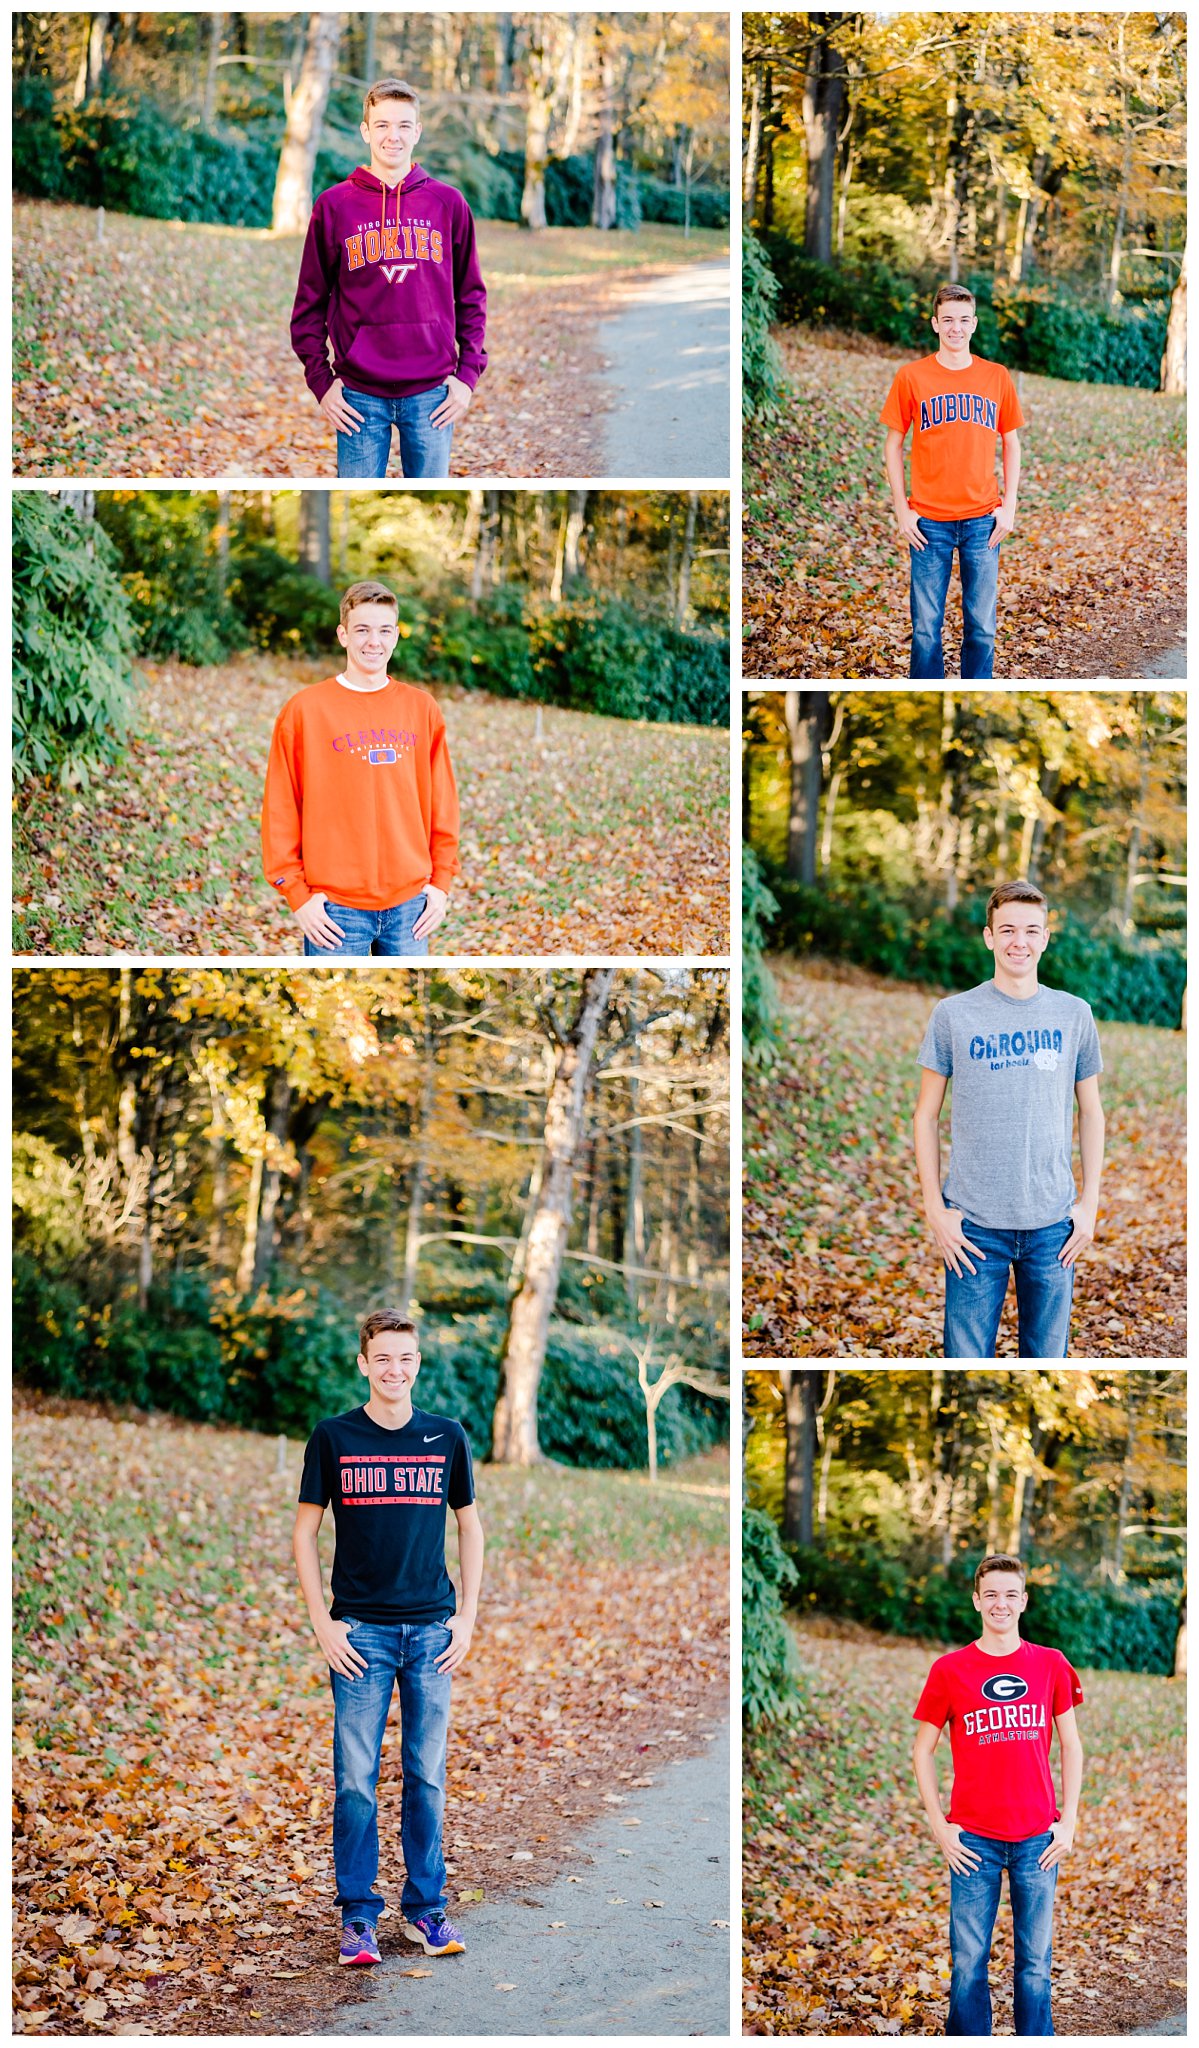 senior portrait in blowing rock nc with college shirts